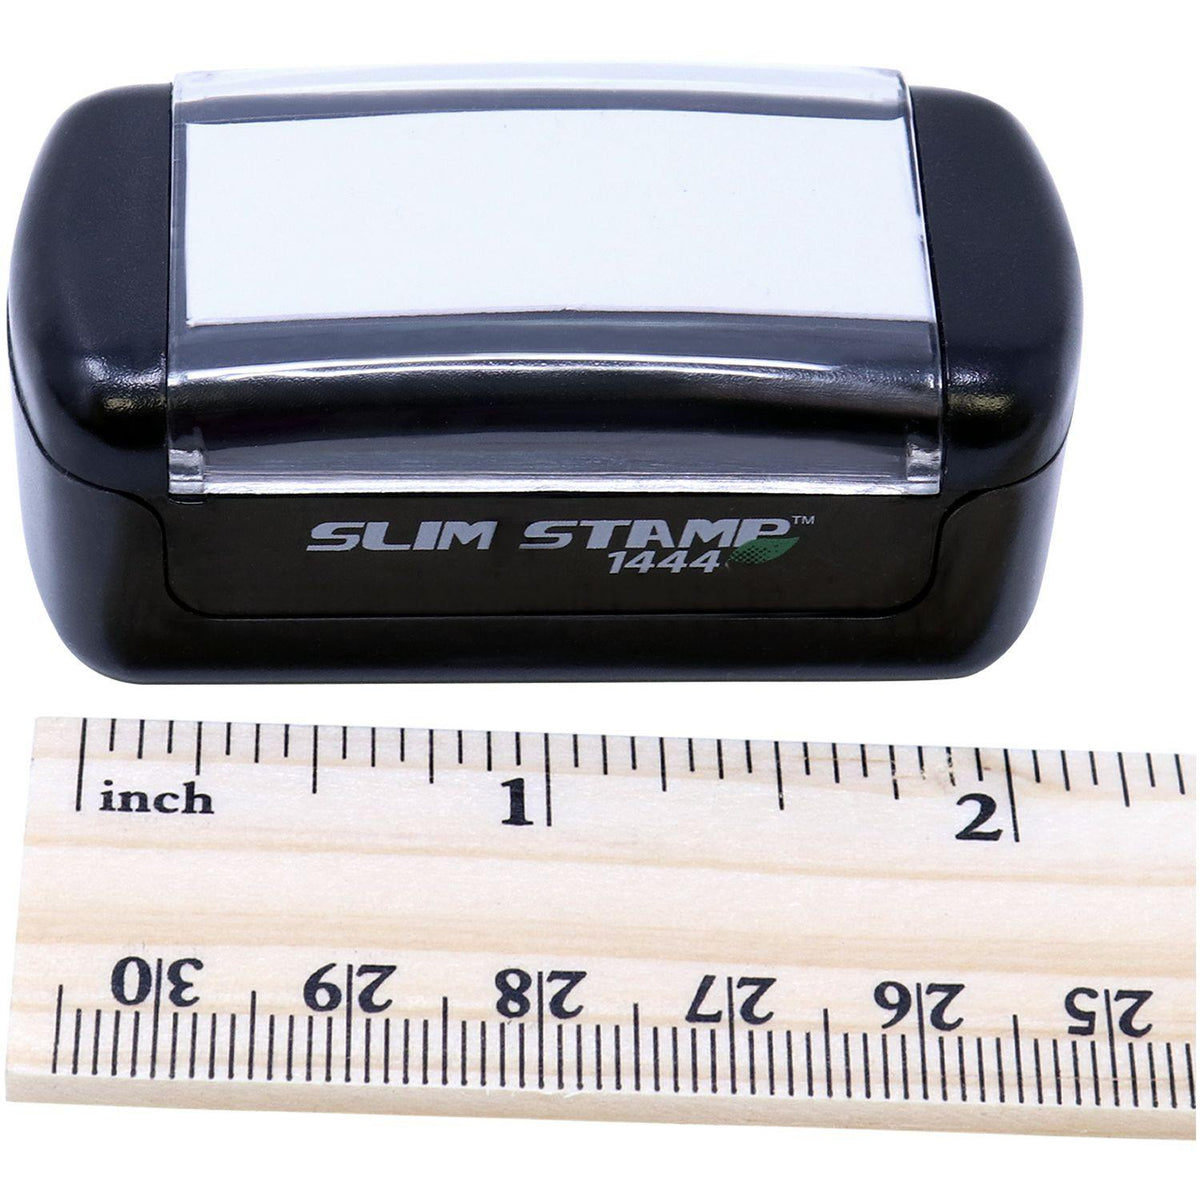 Measurement Slim Pre-Inked Classified Stamp with Ruler